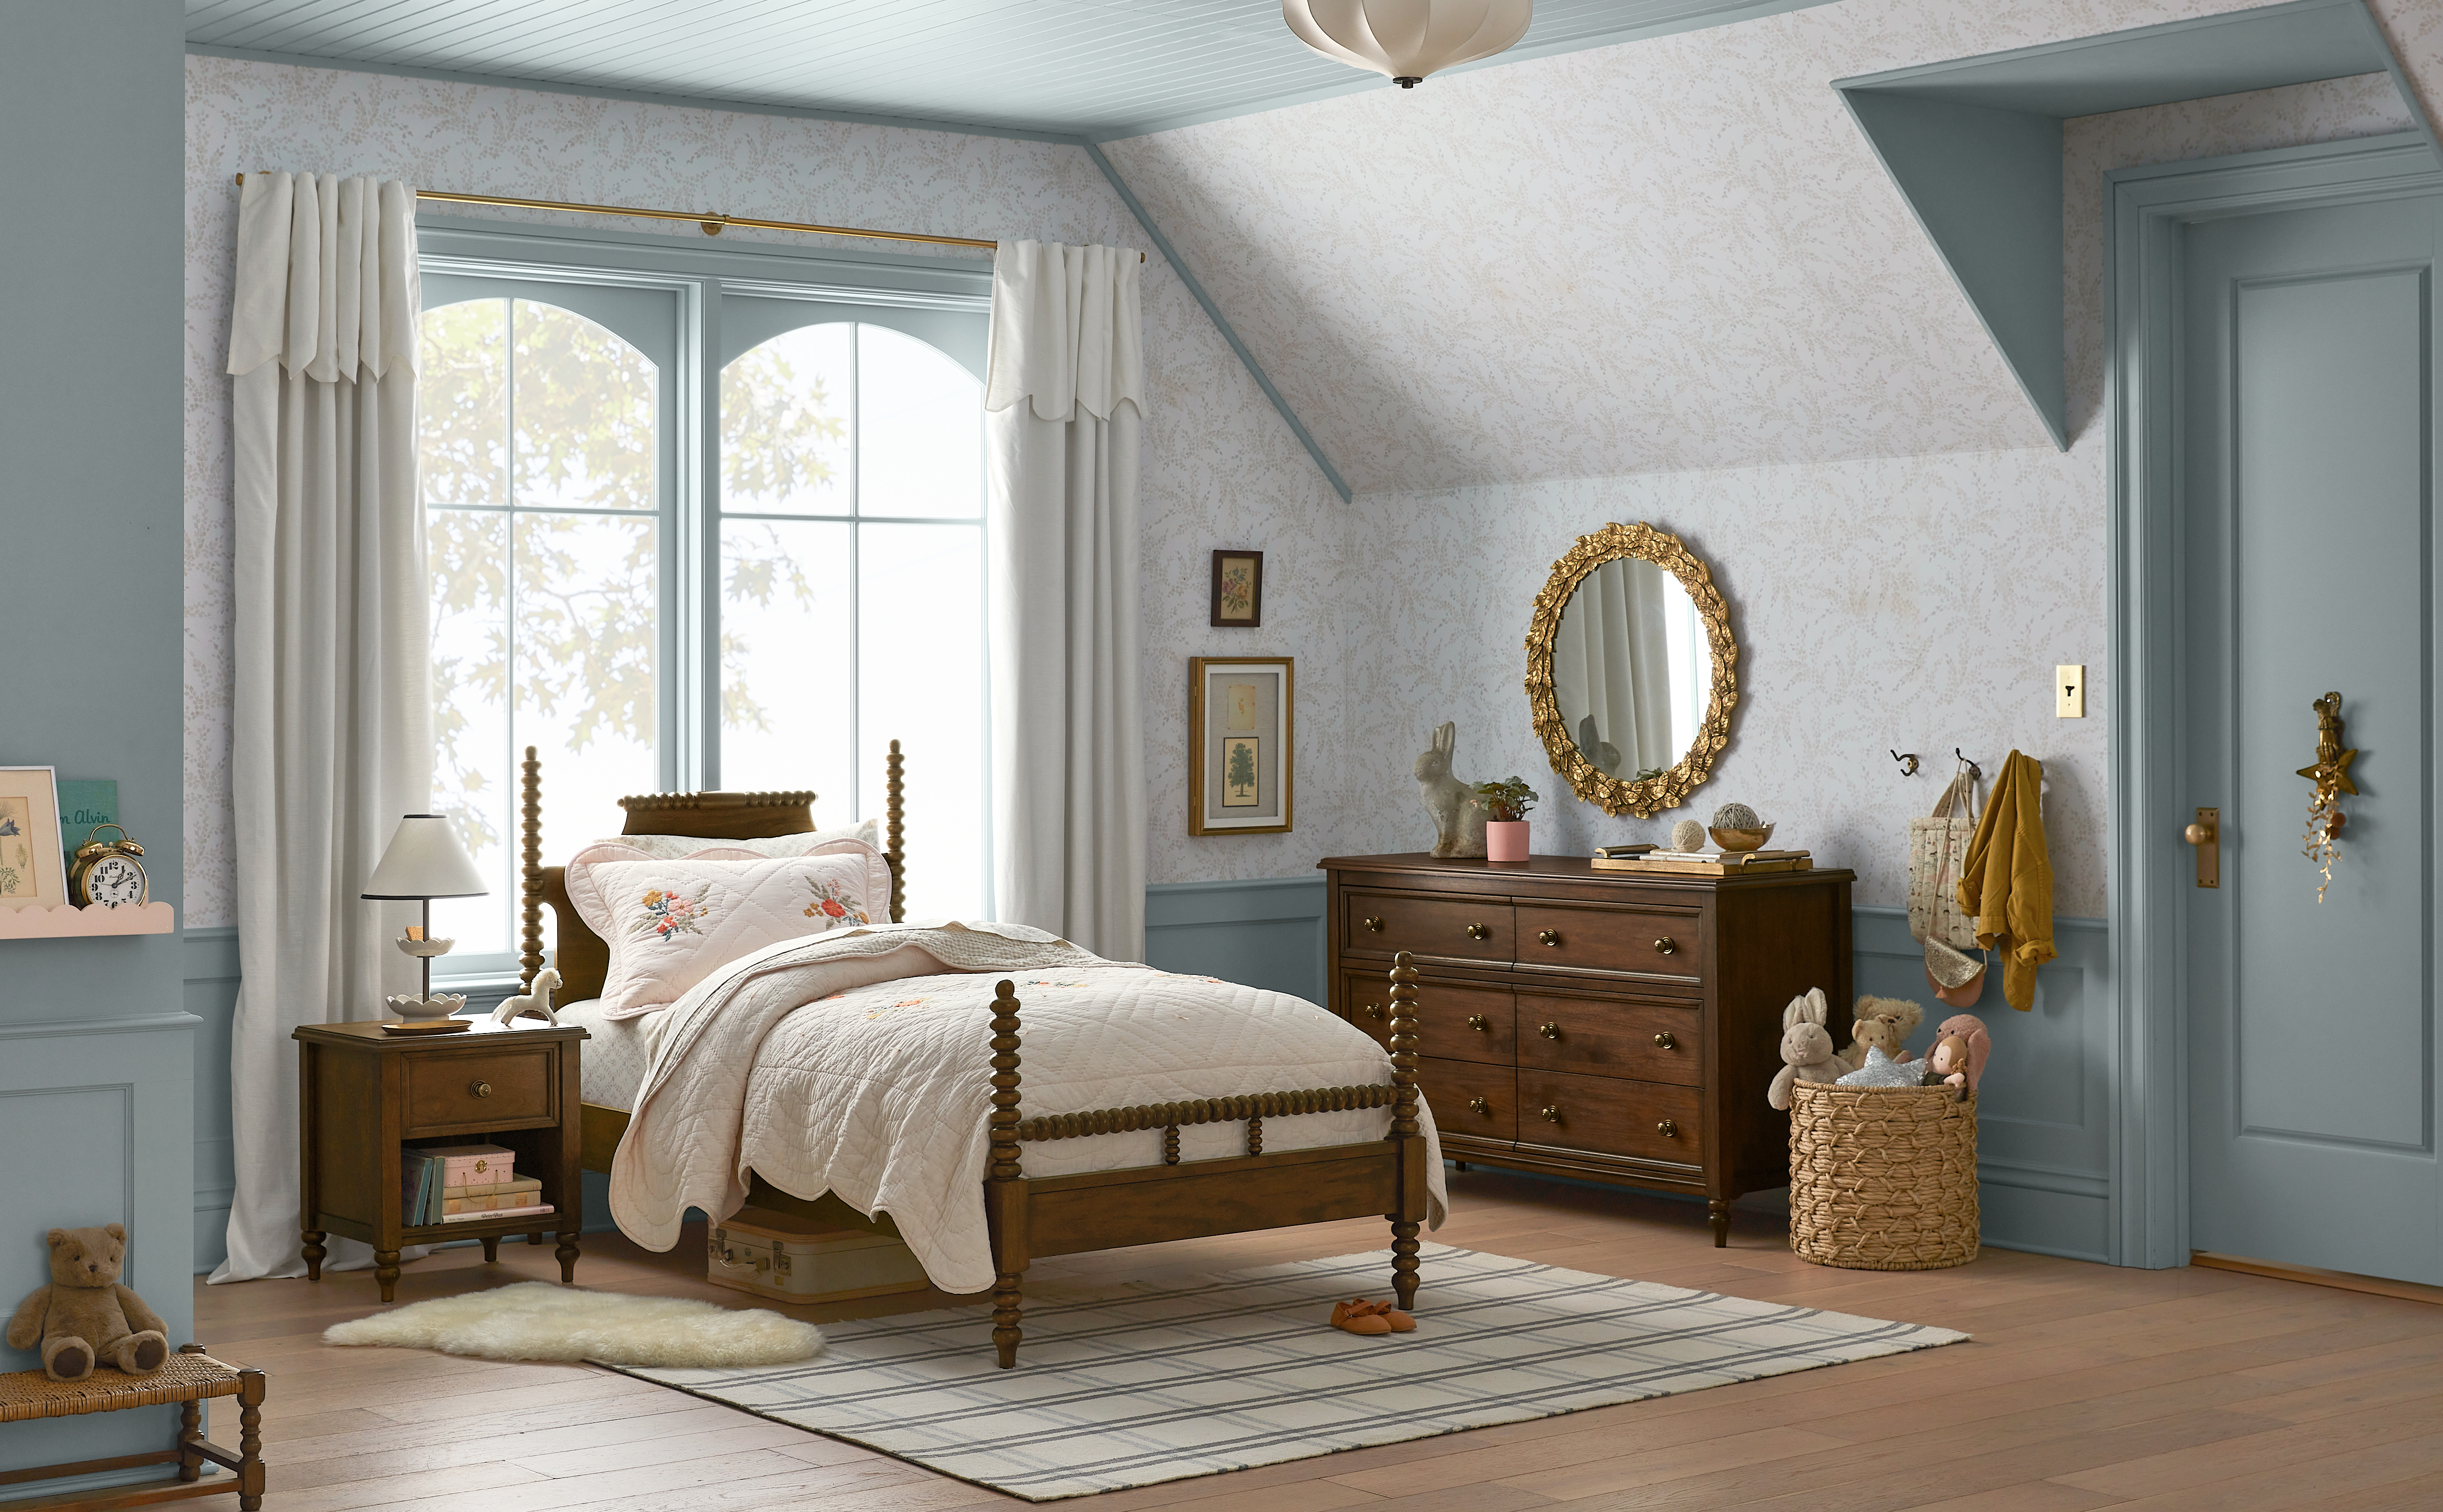 POTTERY BARN KIDS UNVEILS IMAGINATIVE NEW COLLECTION WITH FASHION